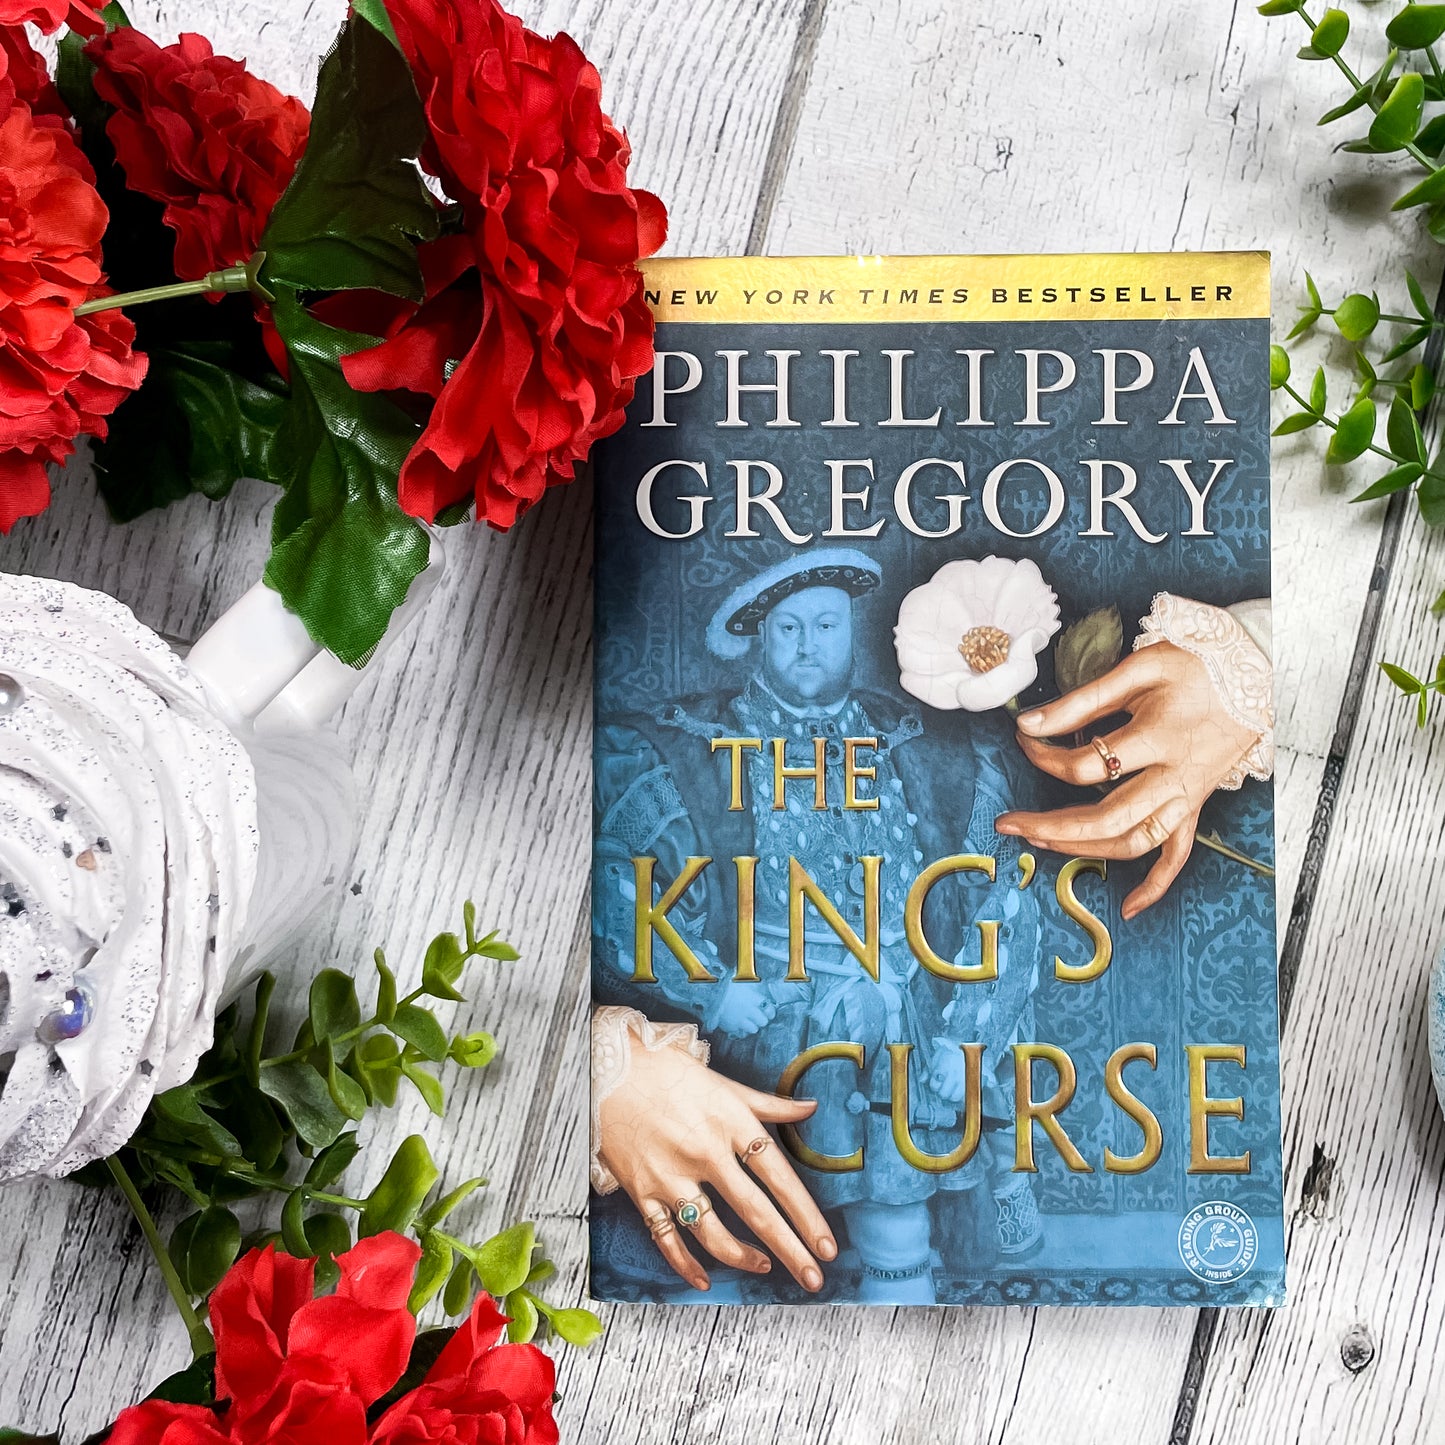 The King's Curse (The Plantagenet and Tudor Novels #7) by Philippa Gregory